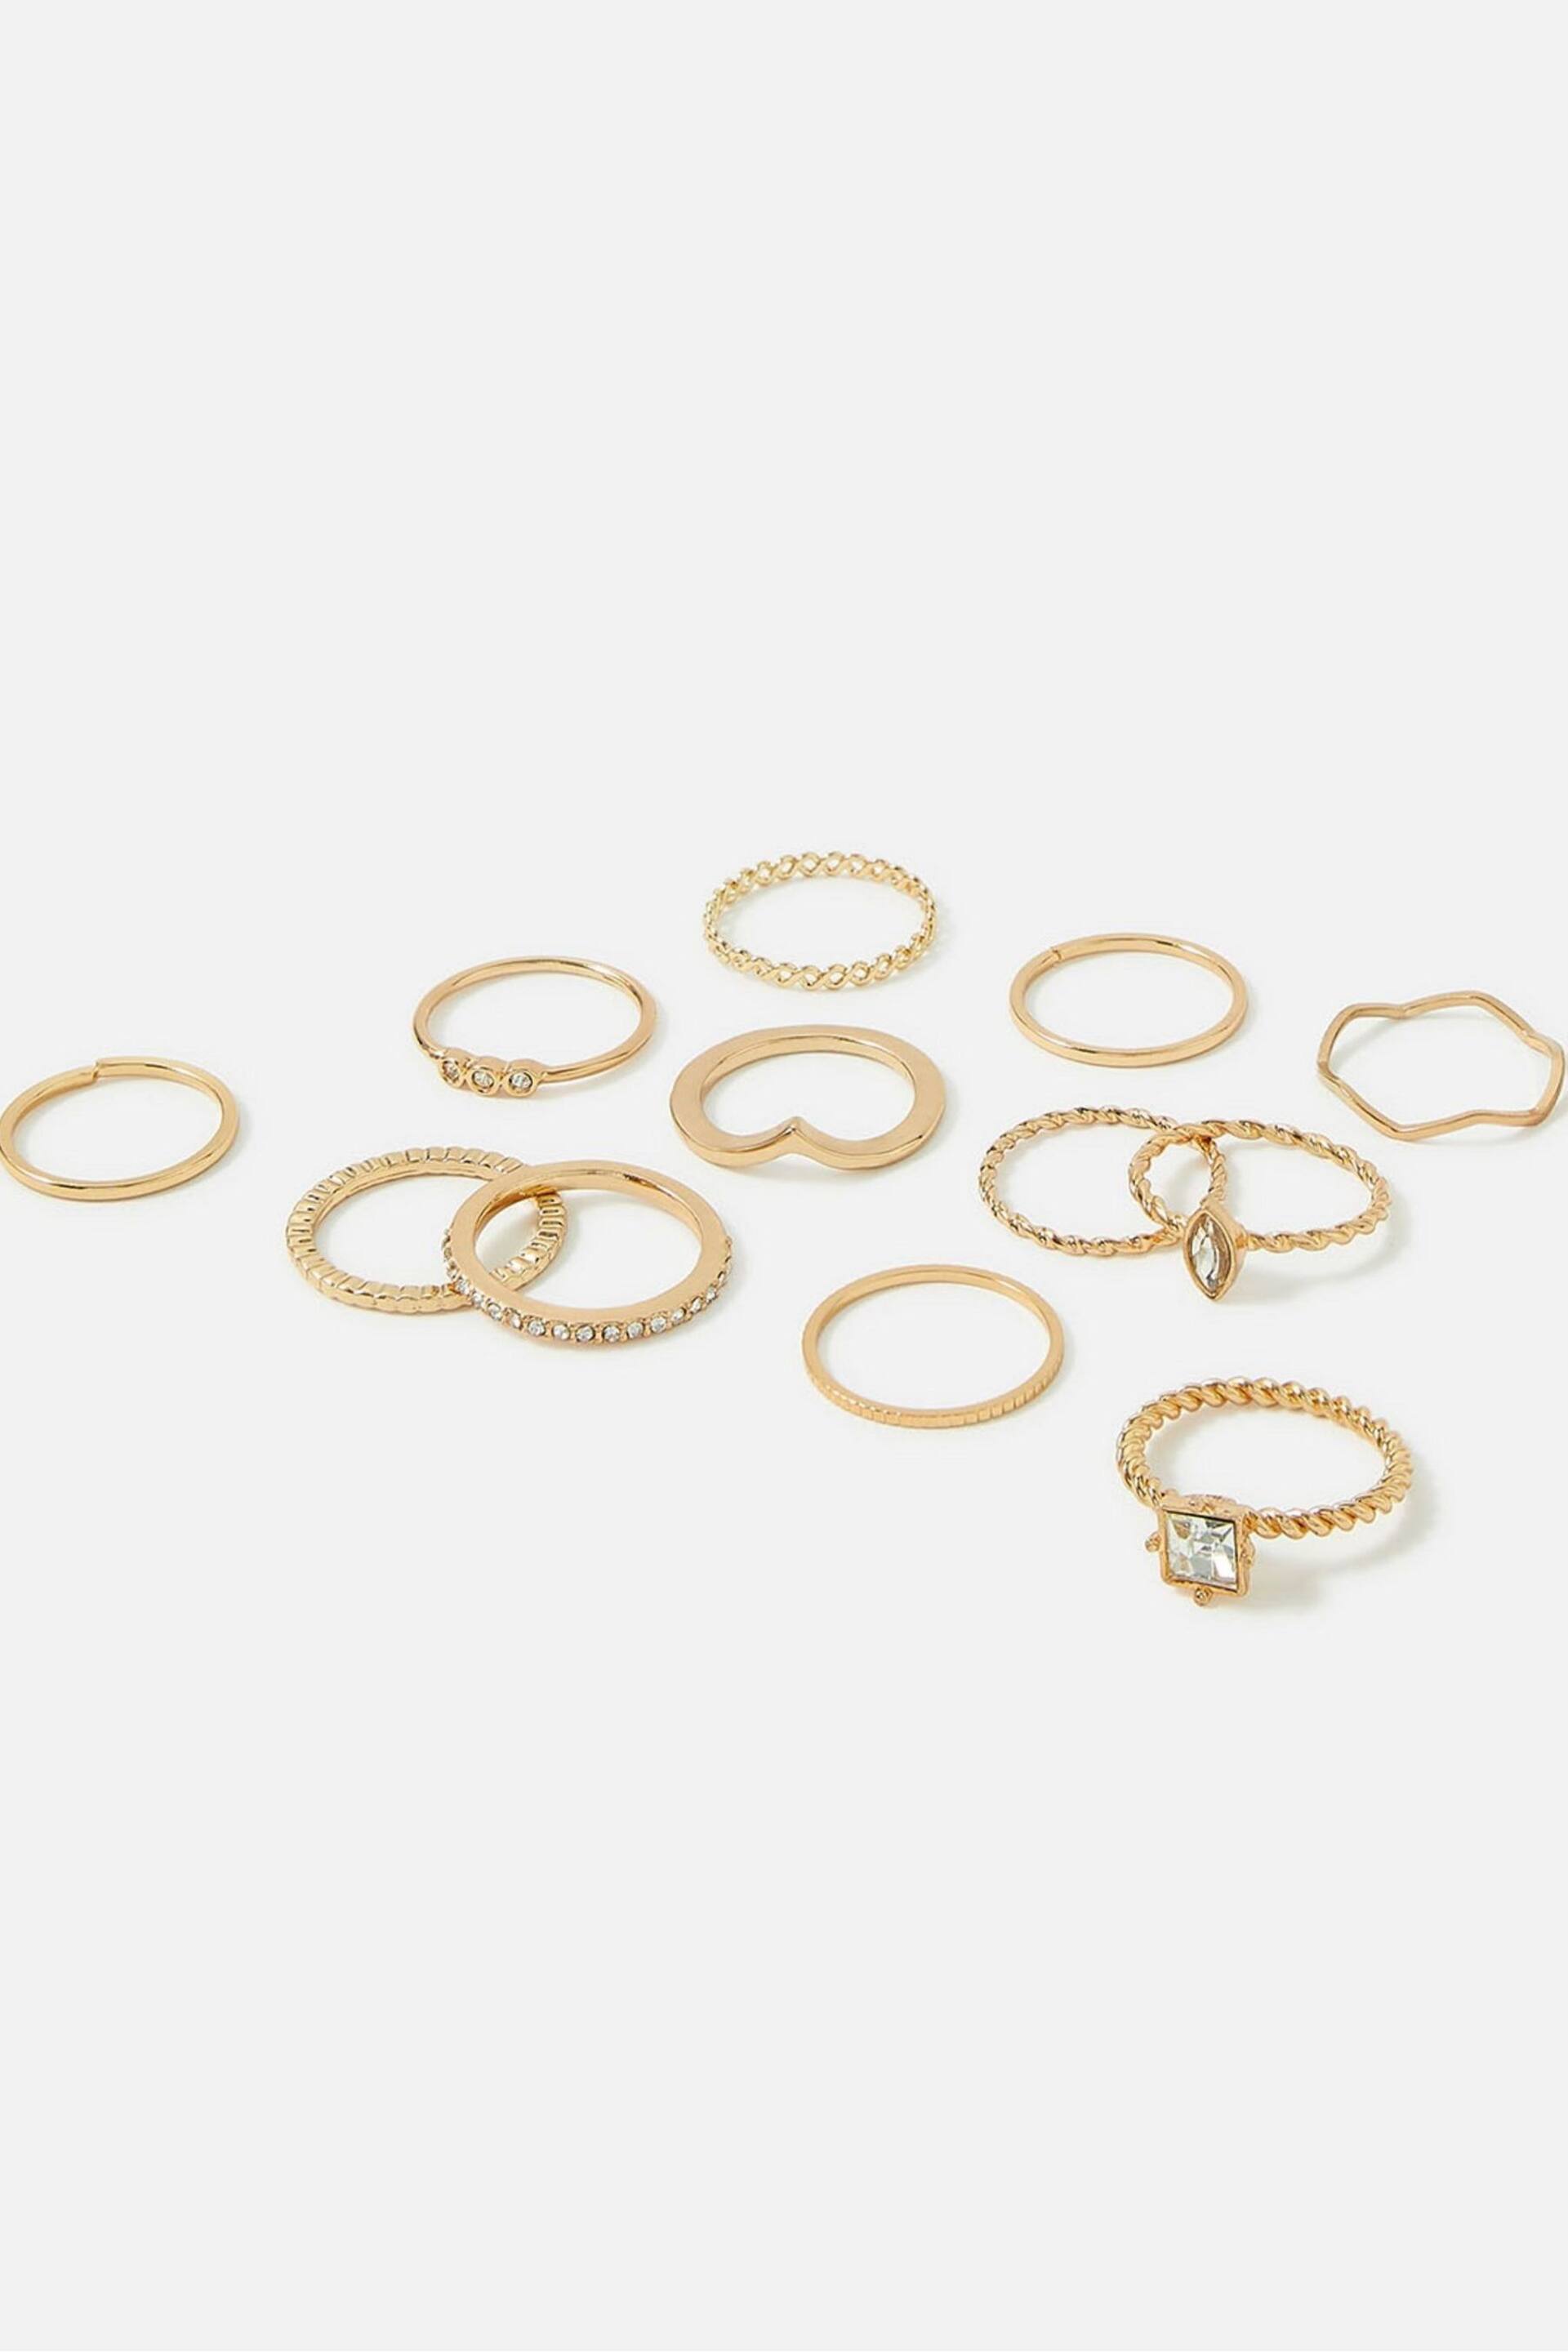 Accessorize Gold Tone Crystal Rings 12 Pack - Image 1 of 3